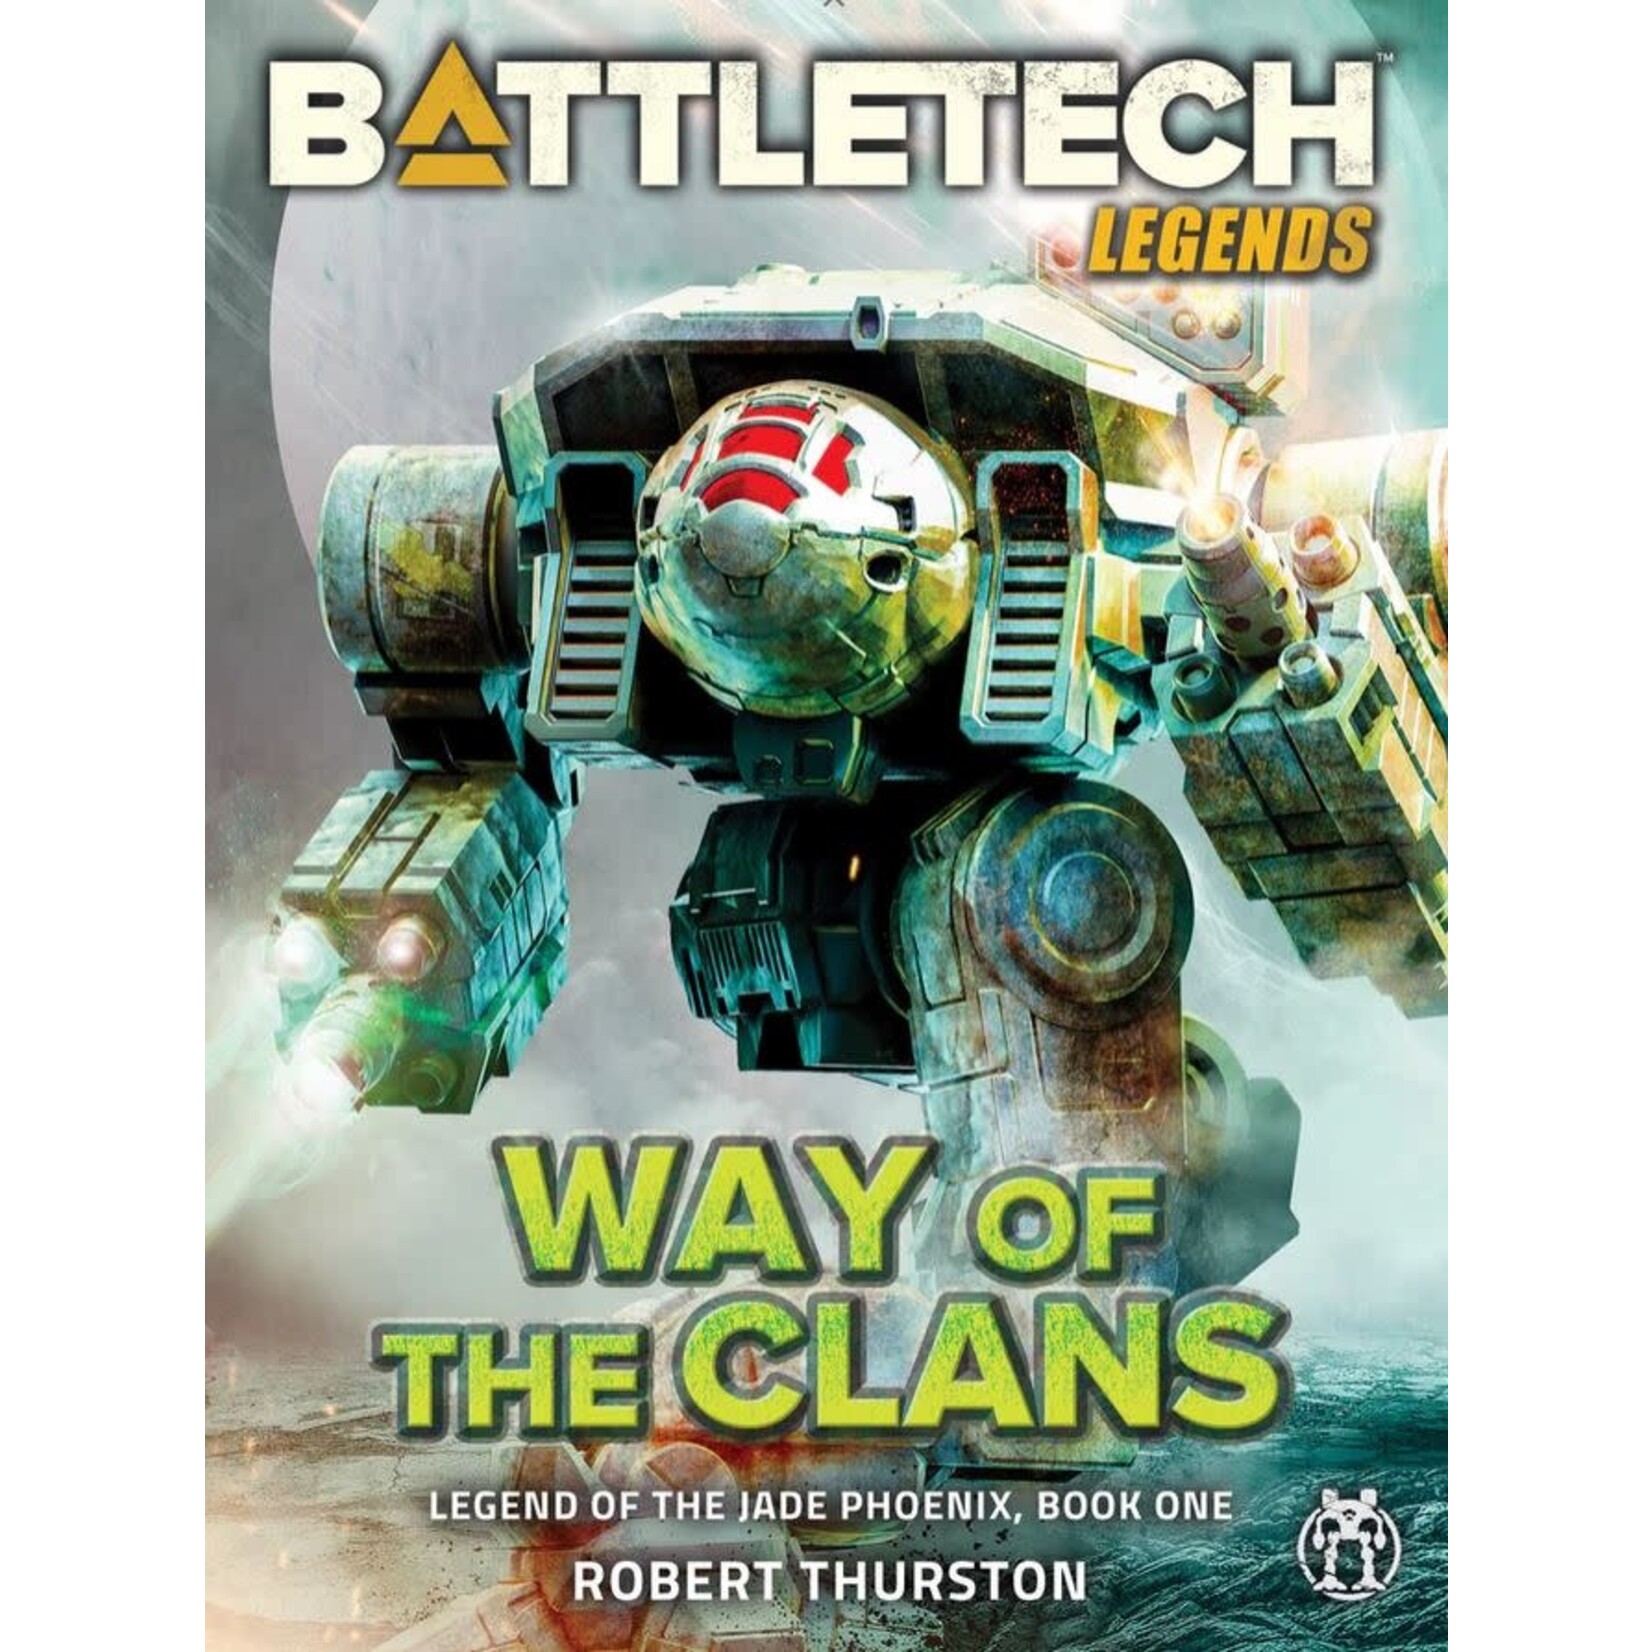 BattleTech: Legend of the Jade Phoenix - Book One - Way of the Clans Hardcover